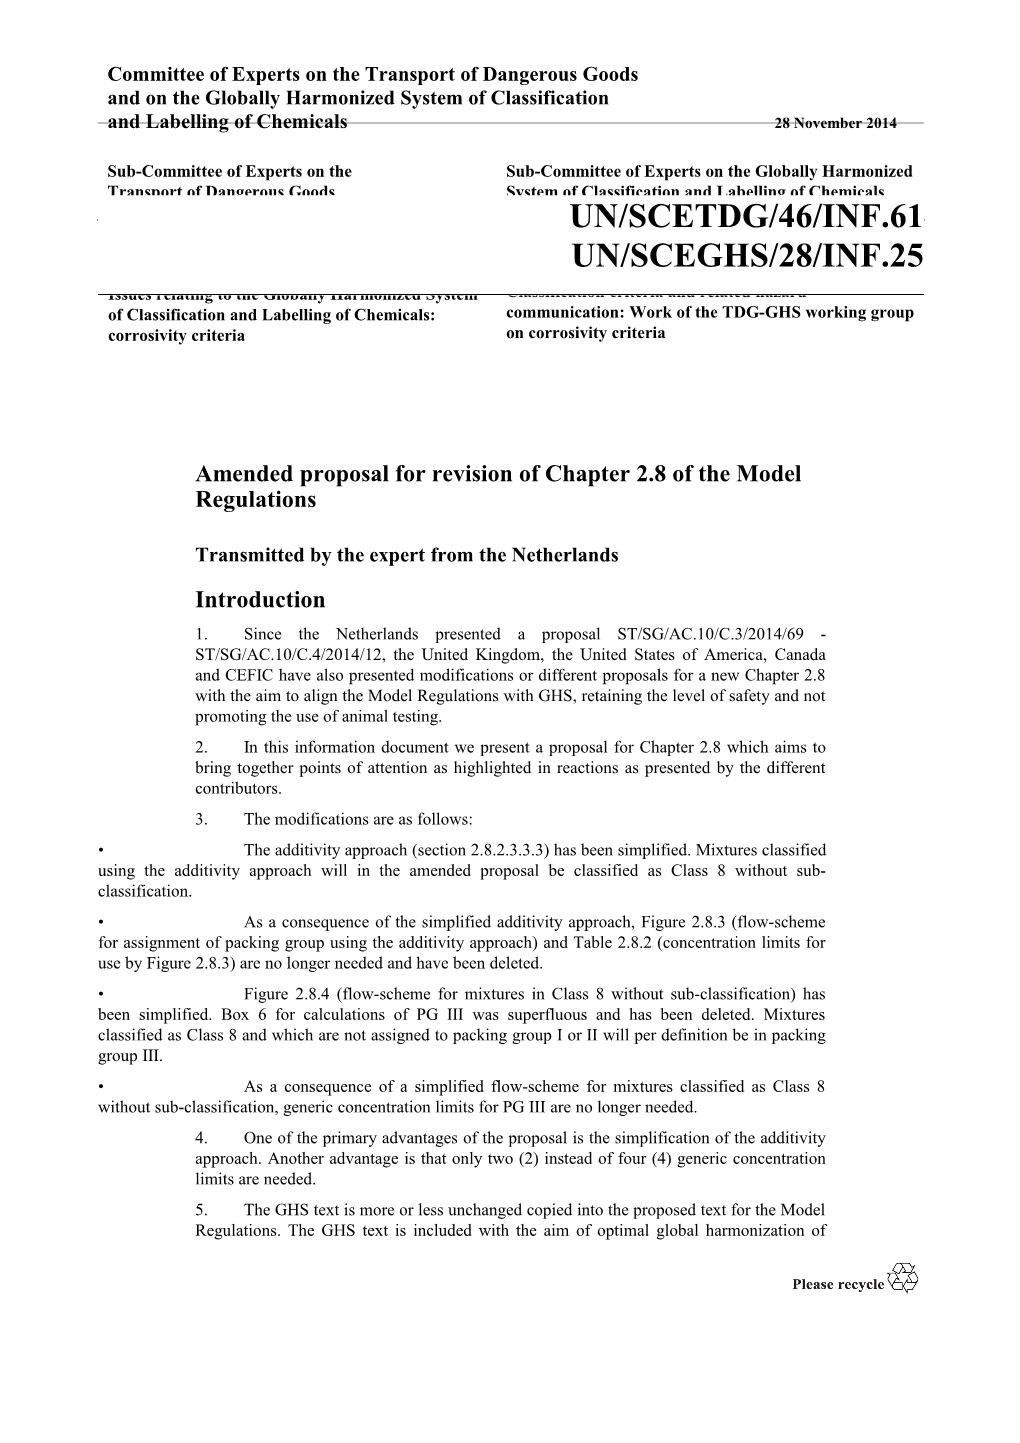 Amended Proposal for Revision of Chapter 2.8 of the Model Regulations